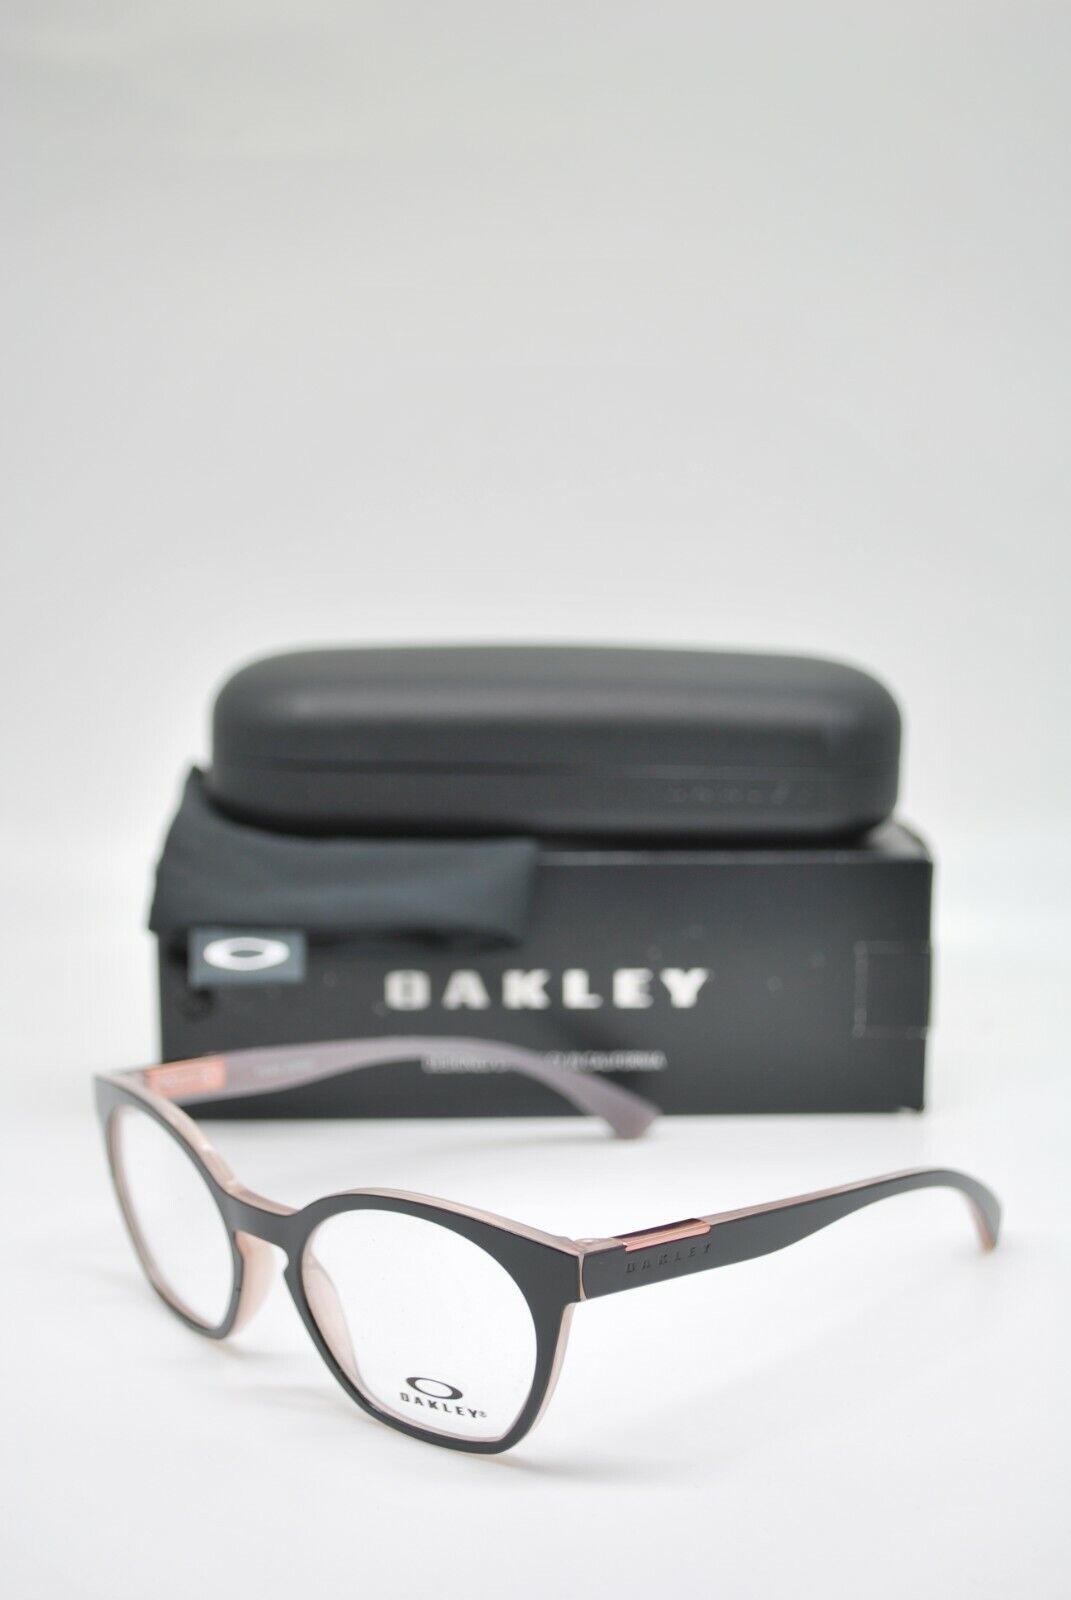 NEW OAKLEY OX8168-0350 TONE DOWN DUSTY ROSE AUTHENTIC EYEGLASSES FRAME RX 50-18